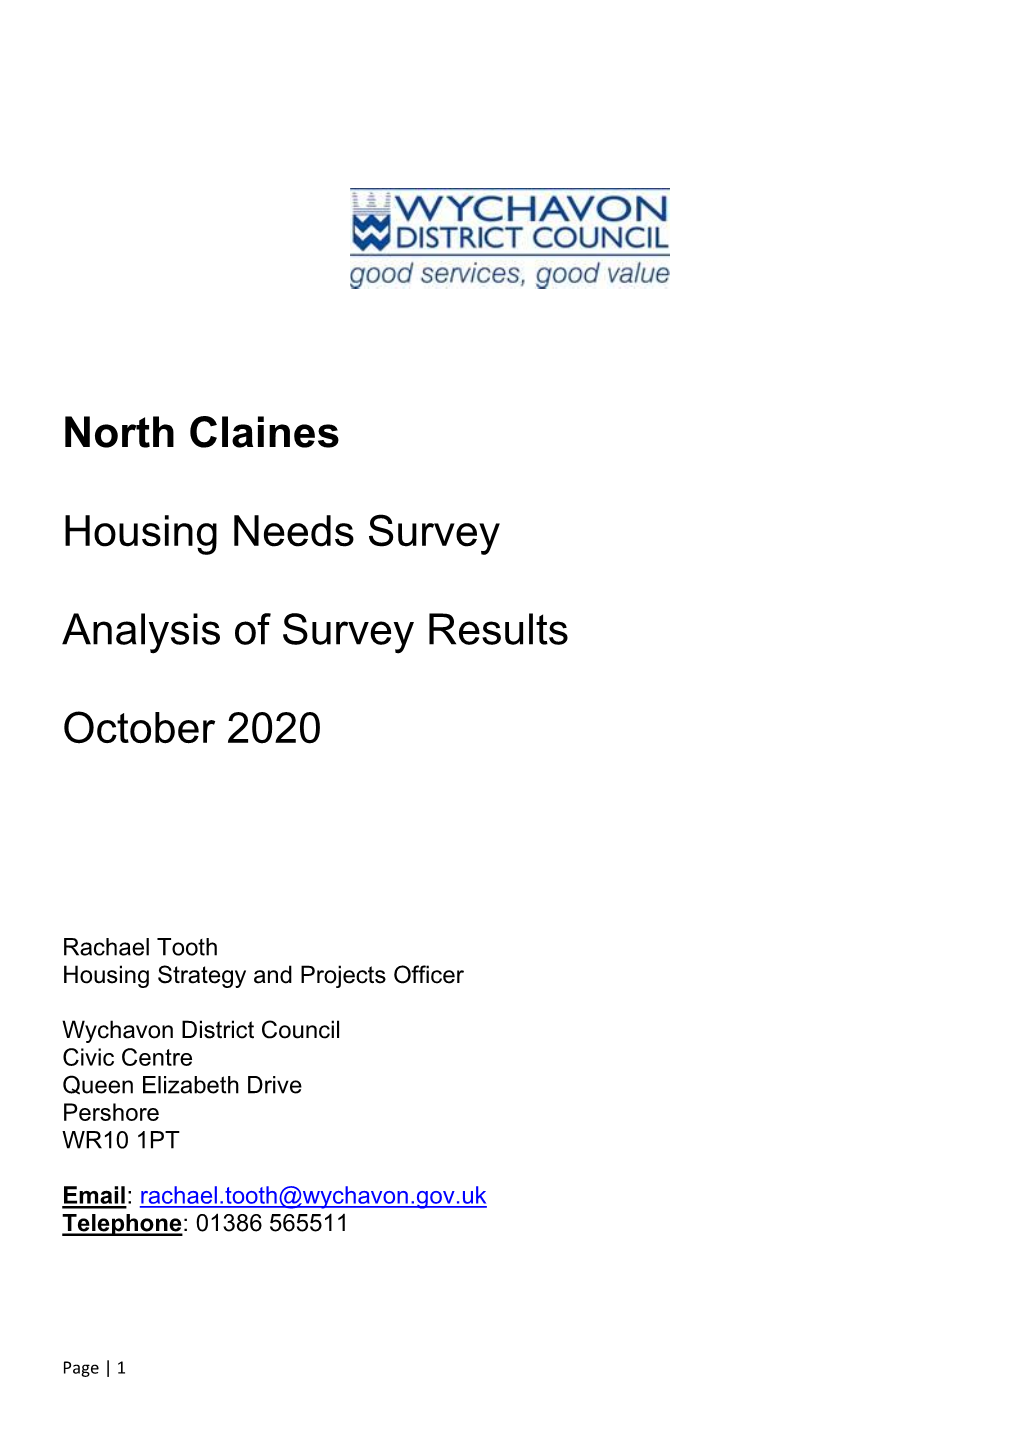 North Claines Housing Needs Survey Analysis of Survey Results October